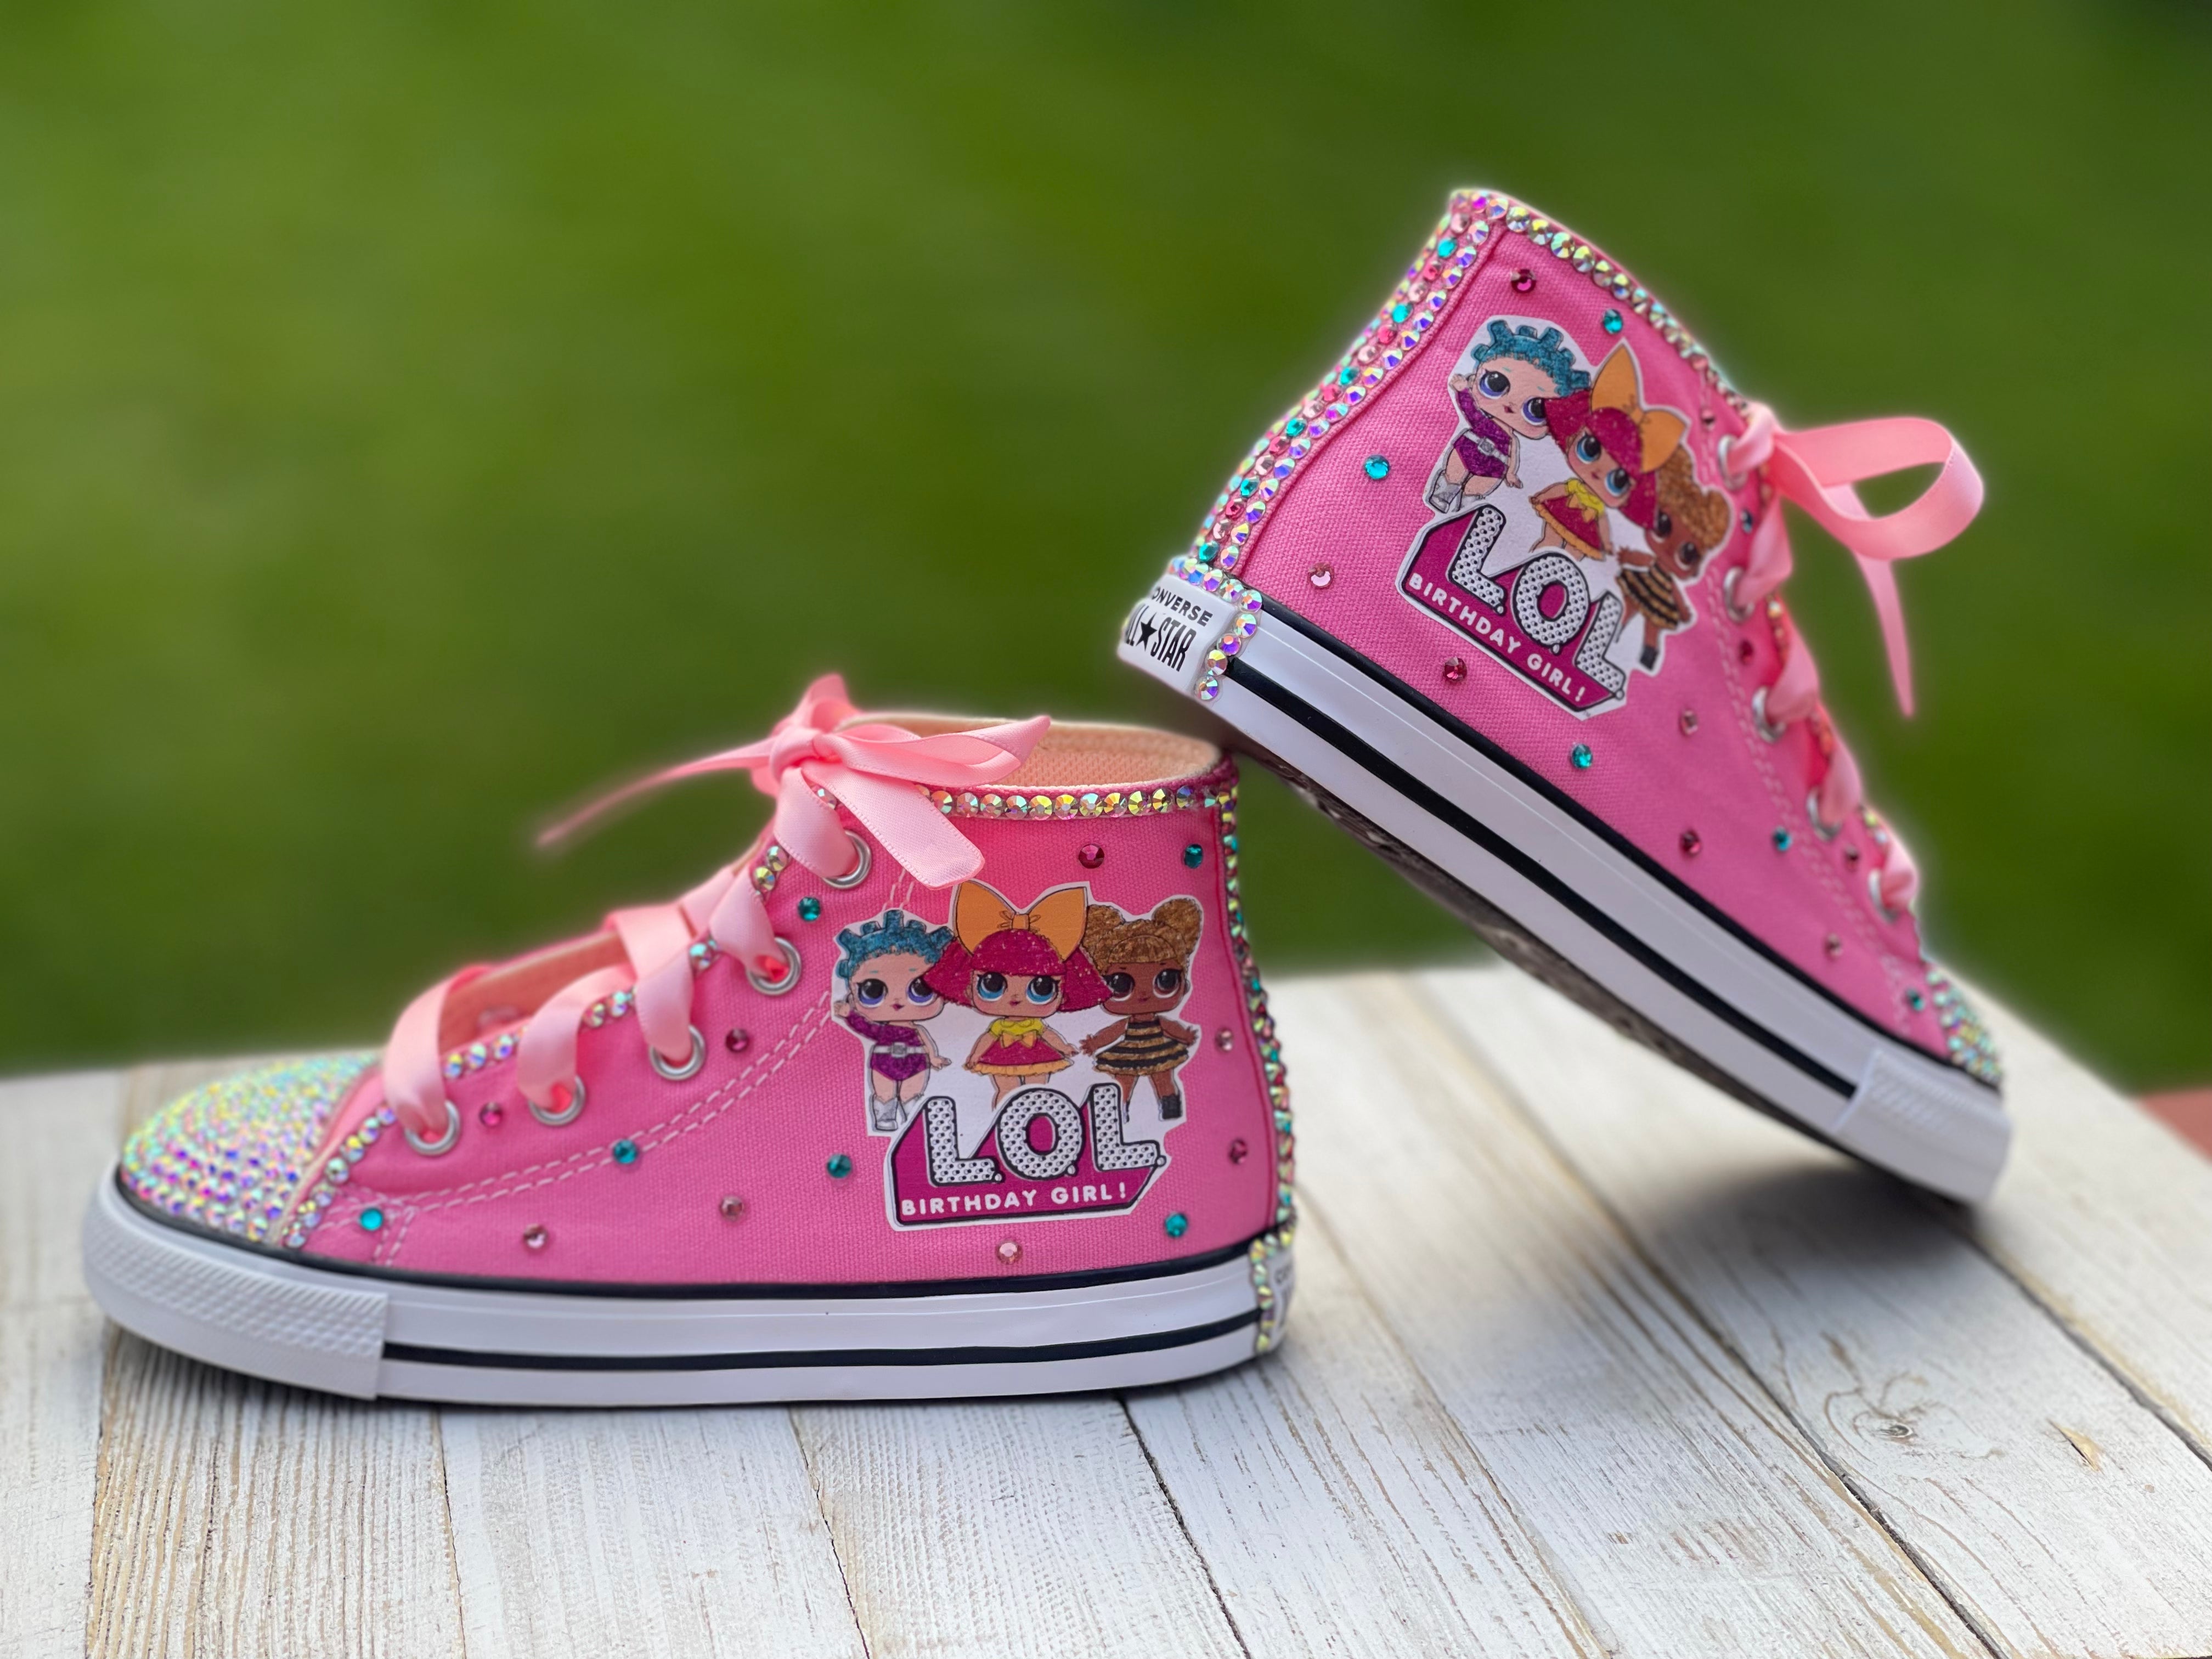 LOL Surprise Doll Center Stage Converse Sneakers, LOL Doll Shoes | Ladybug Tutus